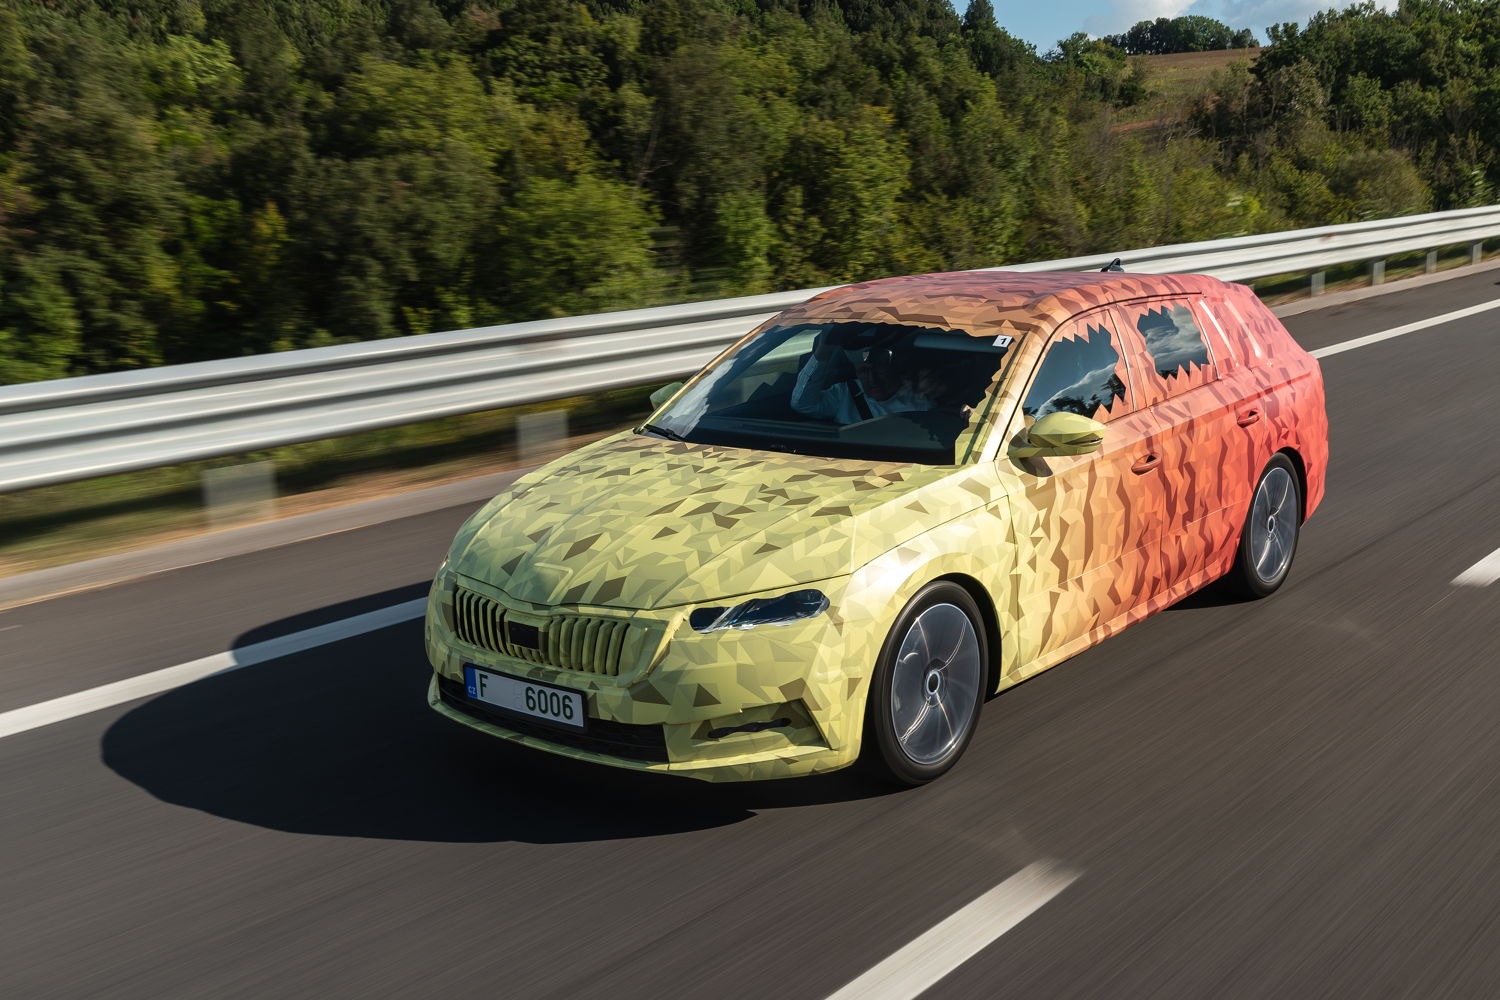 In 2019, shortly before its world premiere, the fourthgeneration ŠKODA OCTAVIA could be spotted on the
streets of Prague and Mladá Boleslav in a special
bicolour camo wrap in yellow and orange, for a game of
“Catch me if you can” with ŠKODA fans.